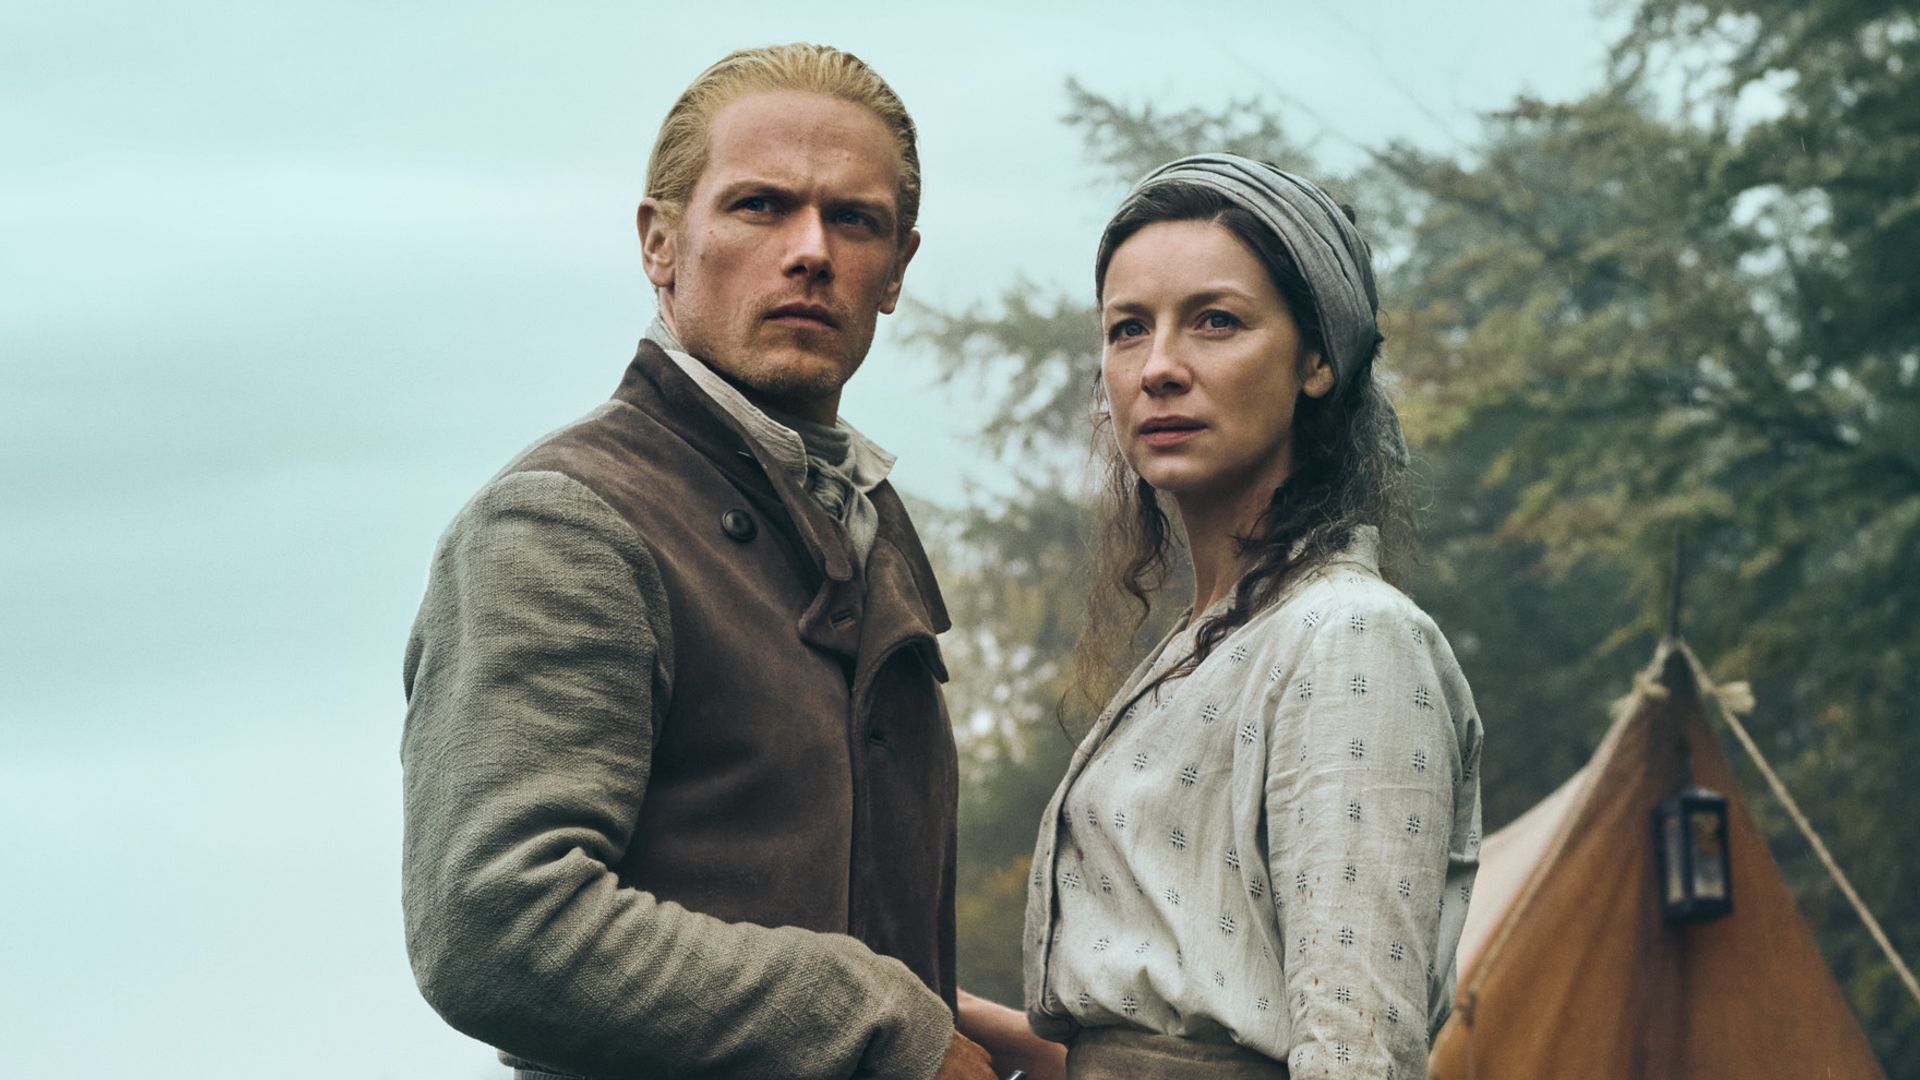 Outlander star Caitríona Balfe pens touching tribute to co-star Sam Heughan on special anniversary | HELLO!